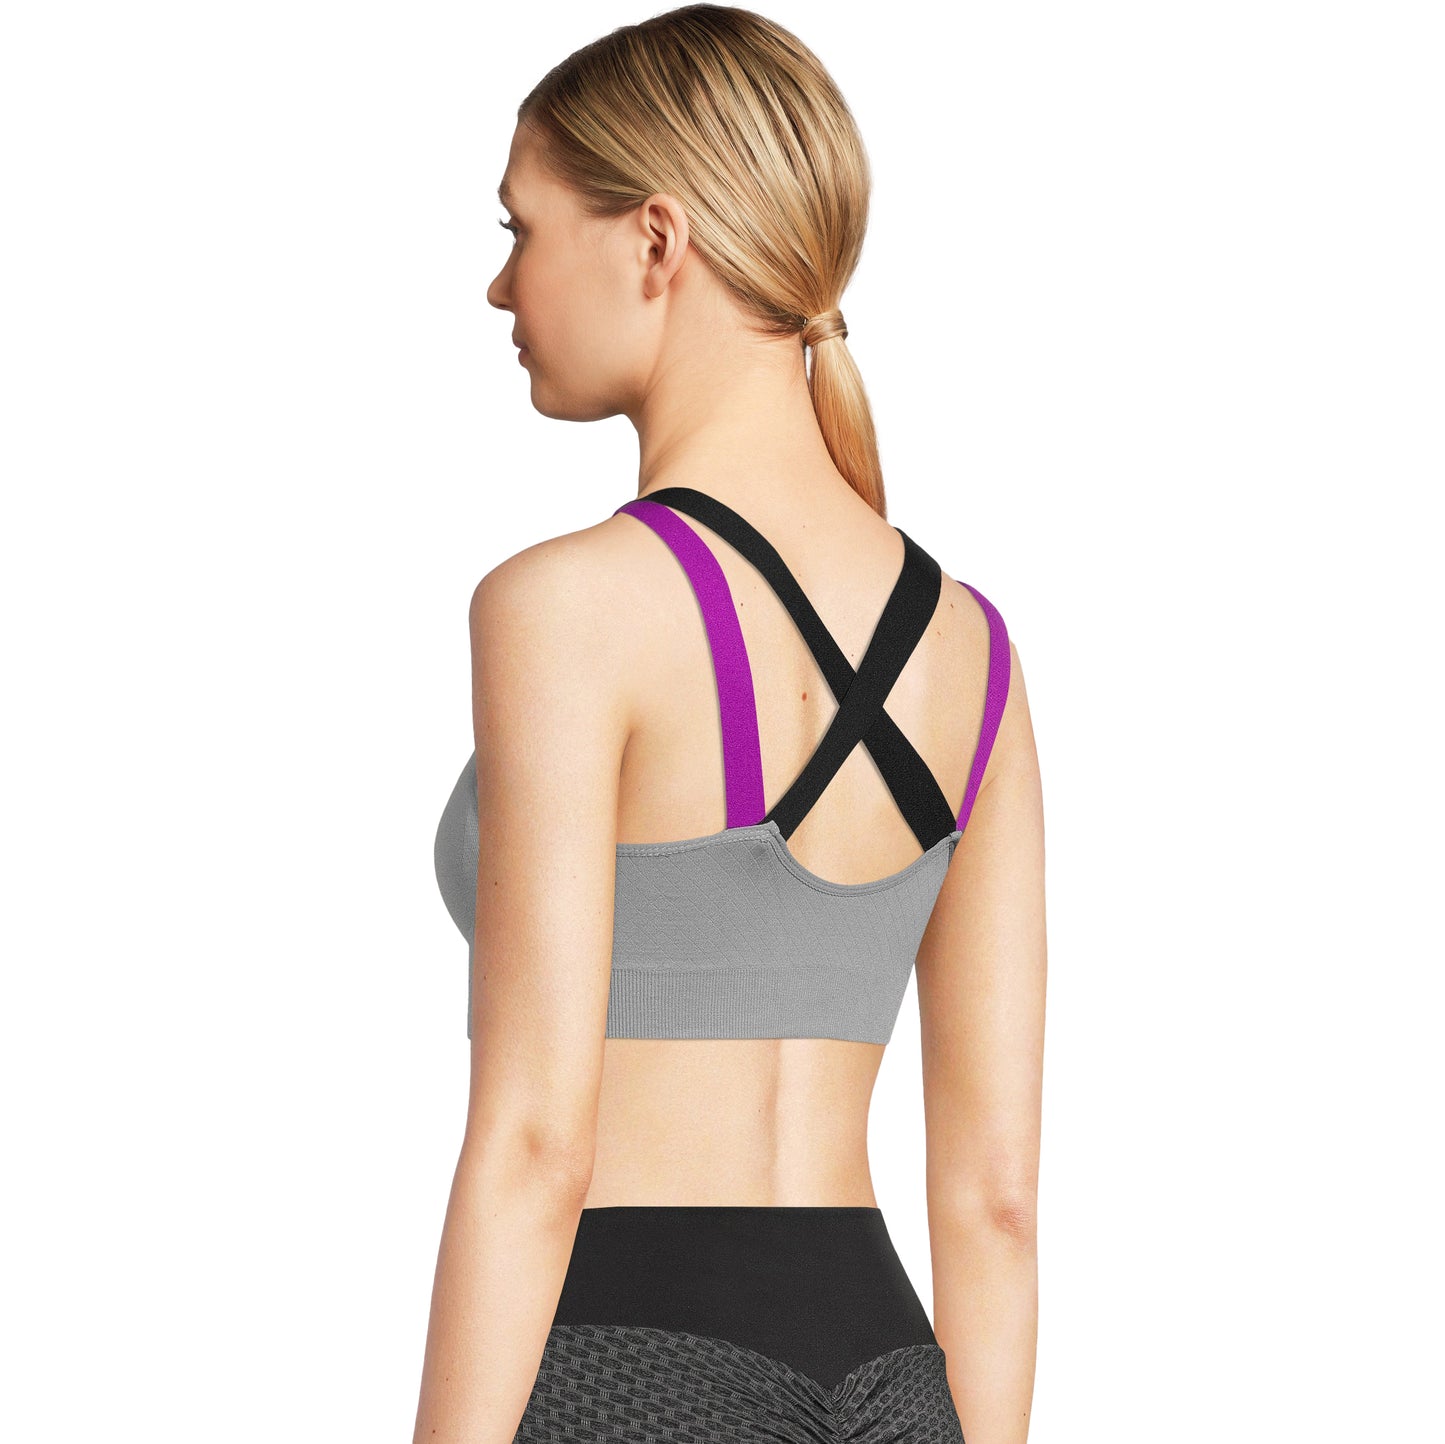 Sports bra Diesel, Non-padding sports bra, Sports bra with crossover  straps at the back